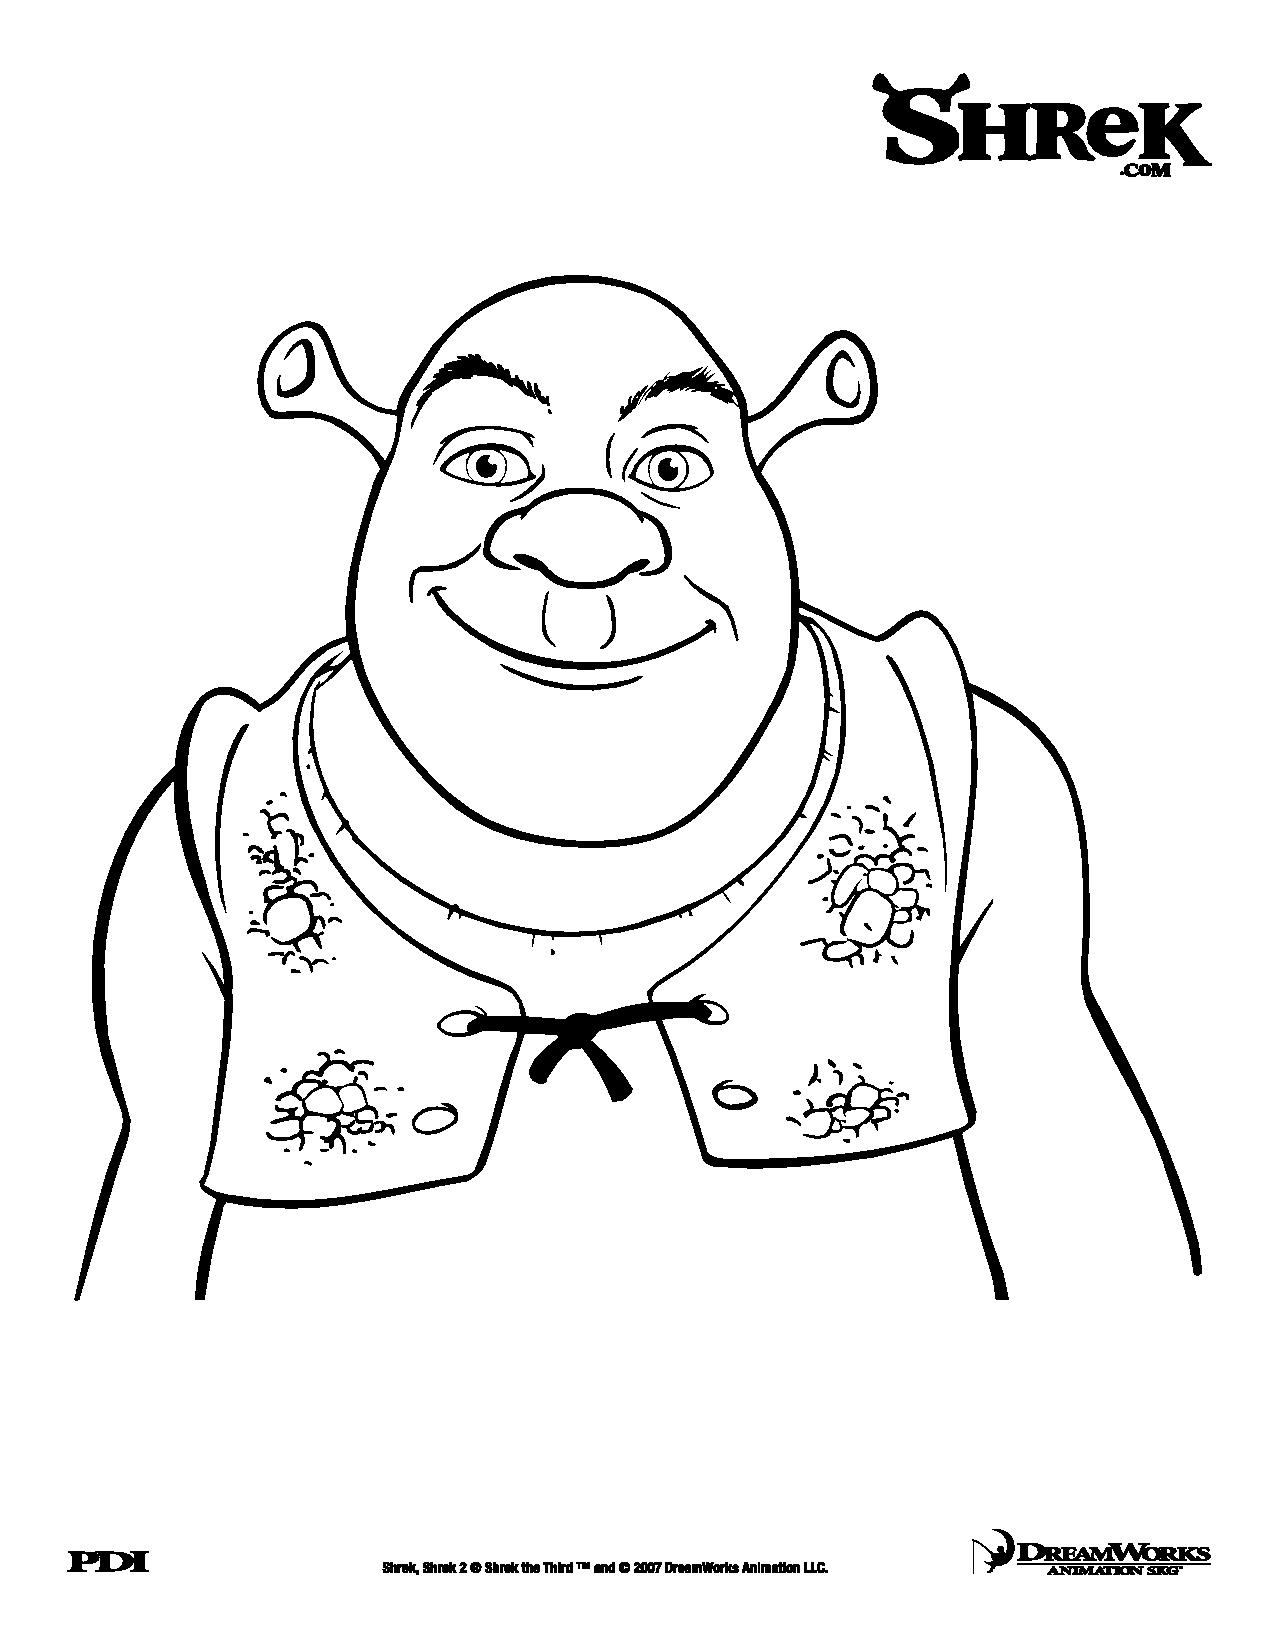 Free shrek drawing to print and color